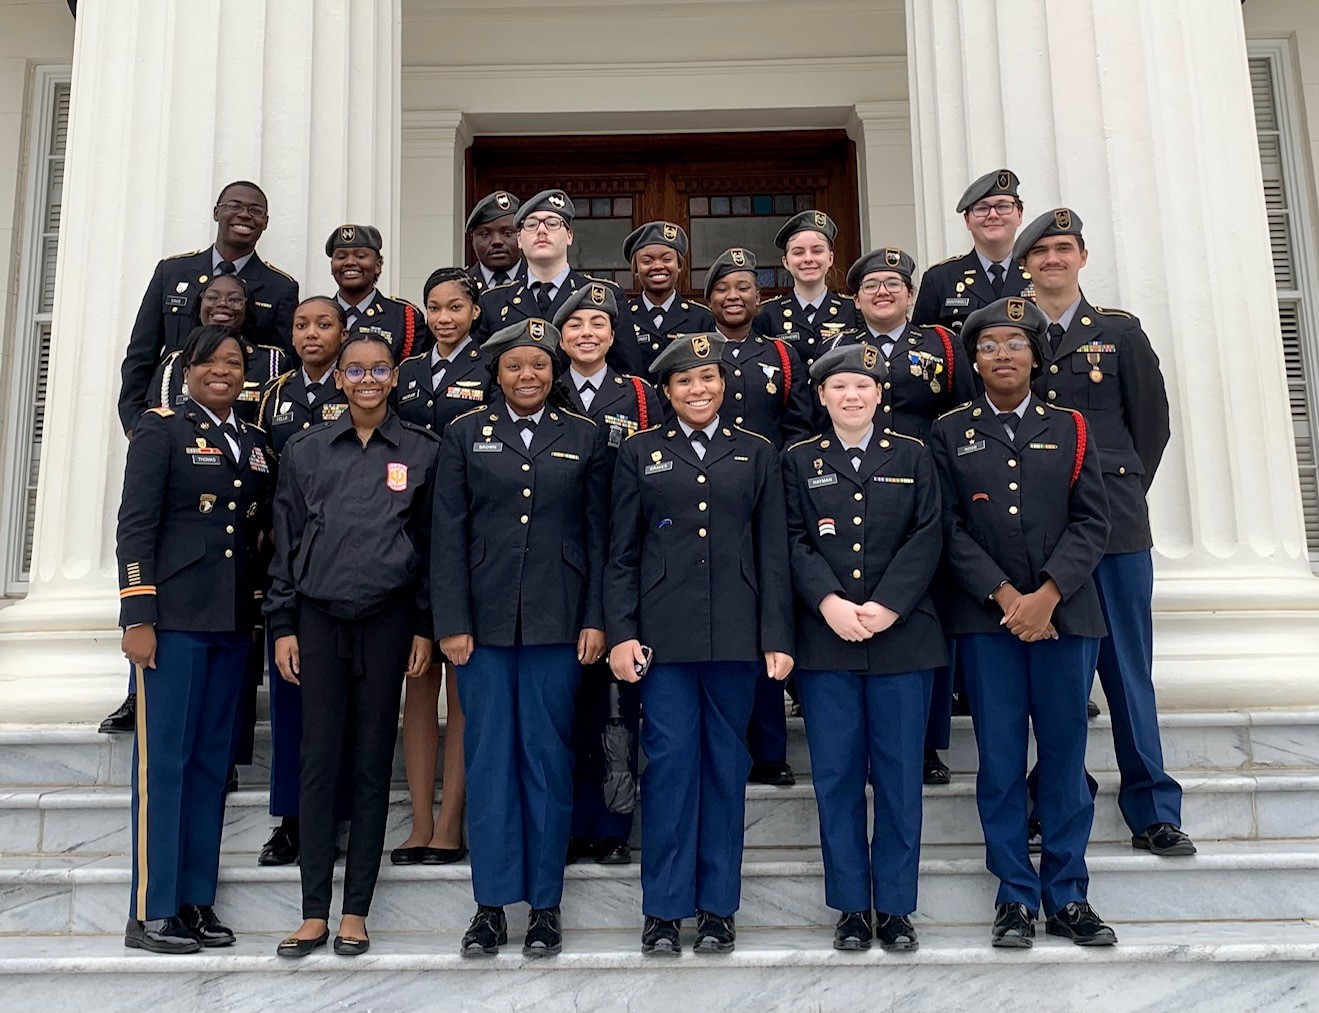 Murphy and Blount High School JROTC cadets pose for a group photo on the steps of Alabama State Capitol for CTE on the Hill in Montgomery, AL